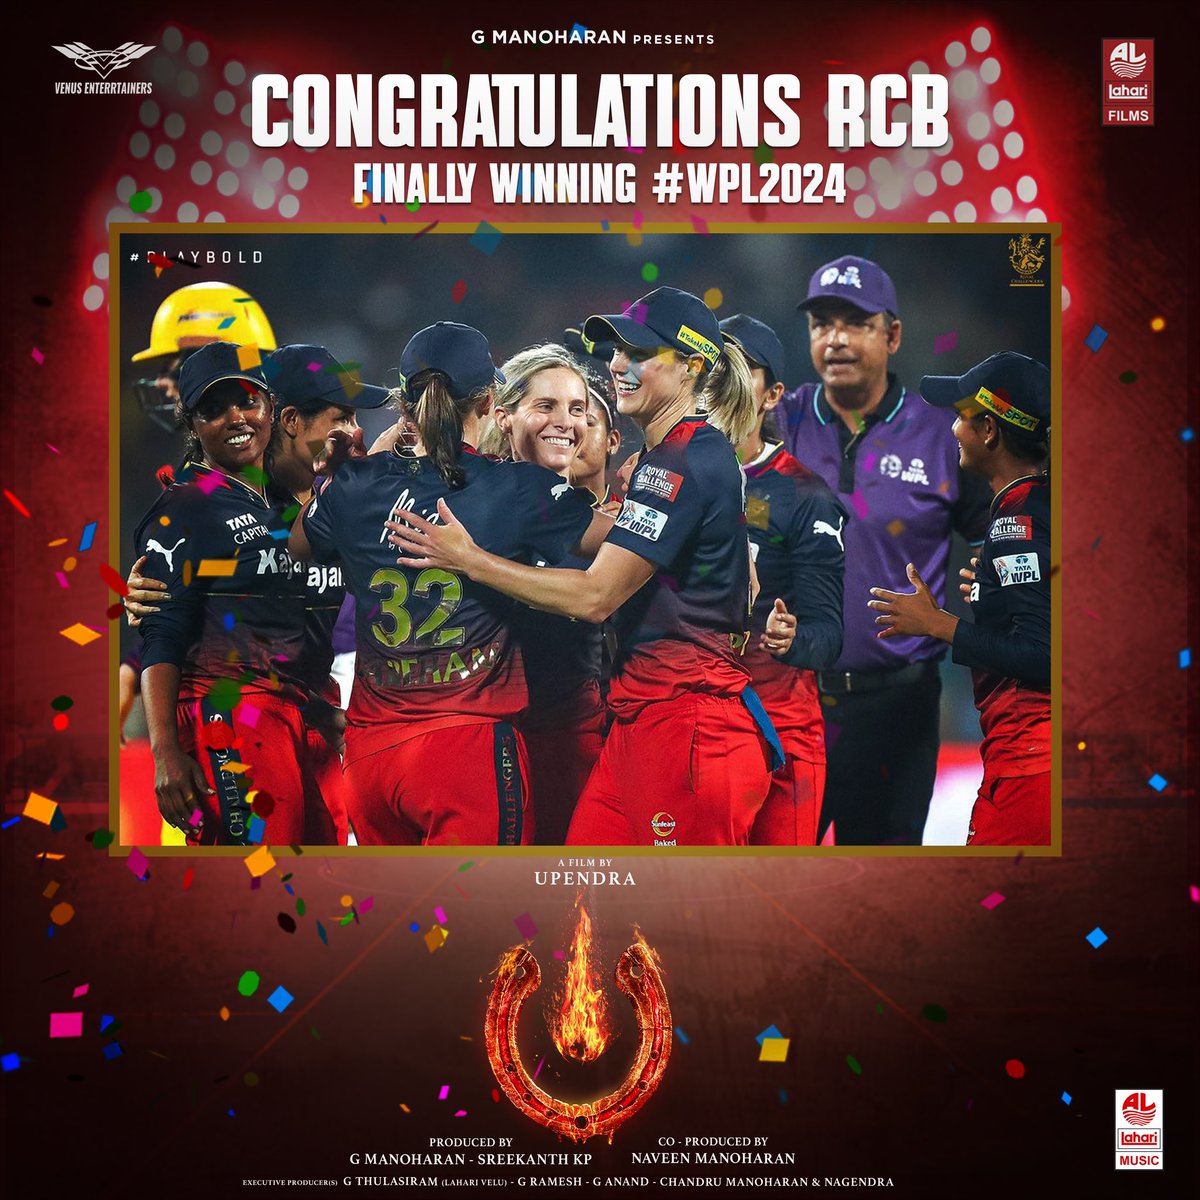 Hats off to @RCBTweets for scripting an epic victory in the final showdown! The trophy is finally home where it belongs! #EeSalaCupNamde 🏆🔥 #WPL2024 #RCB #UITheMovie #UppiDirects @nimmaupendra #GManoharan @Laharifilm @enterrtainers @kp_sreekanth #NaveenManoharan @AJANEESHB…